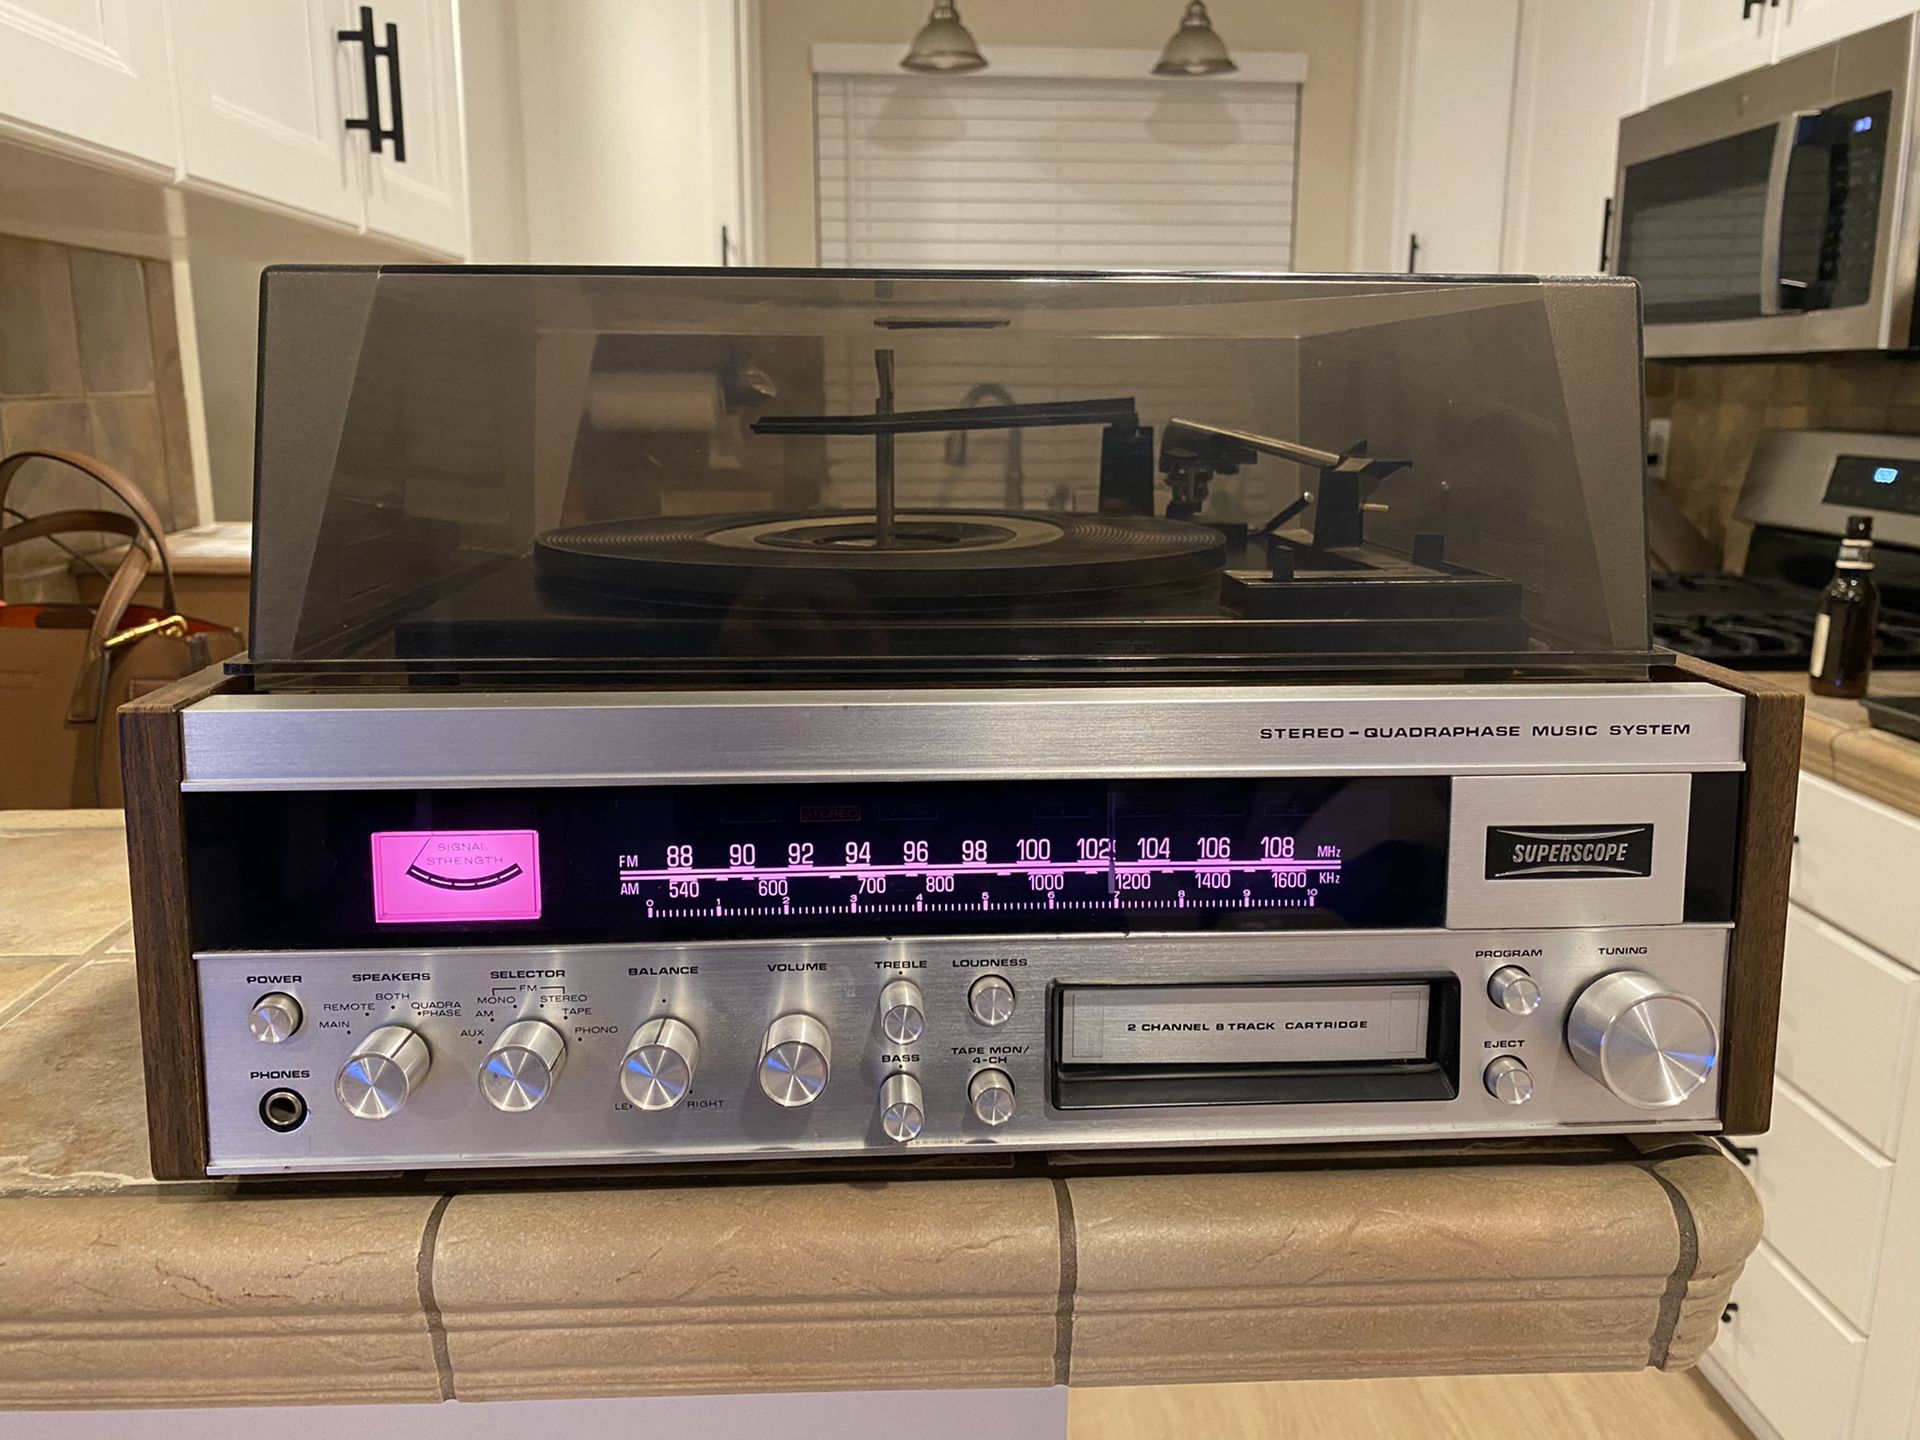 Superscope MS-38 vintage stereo receiver